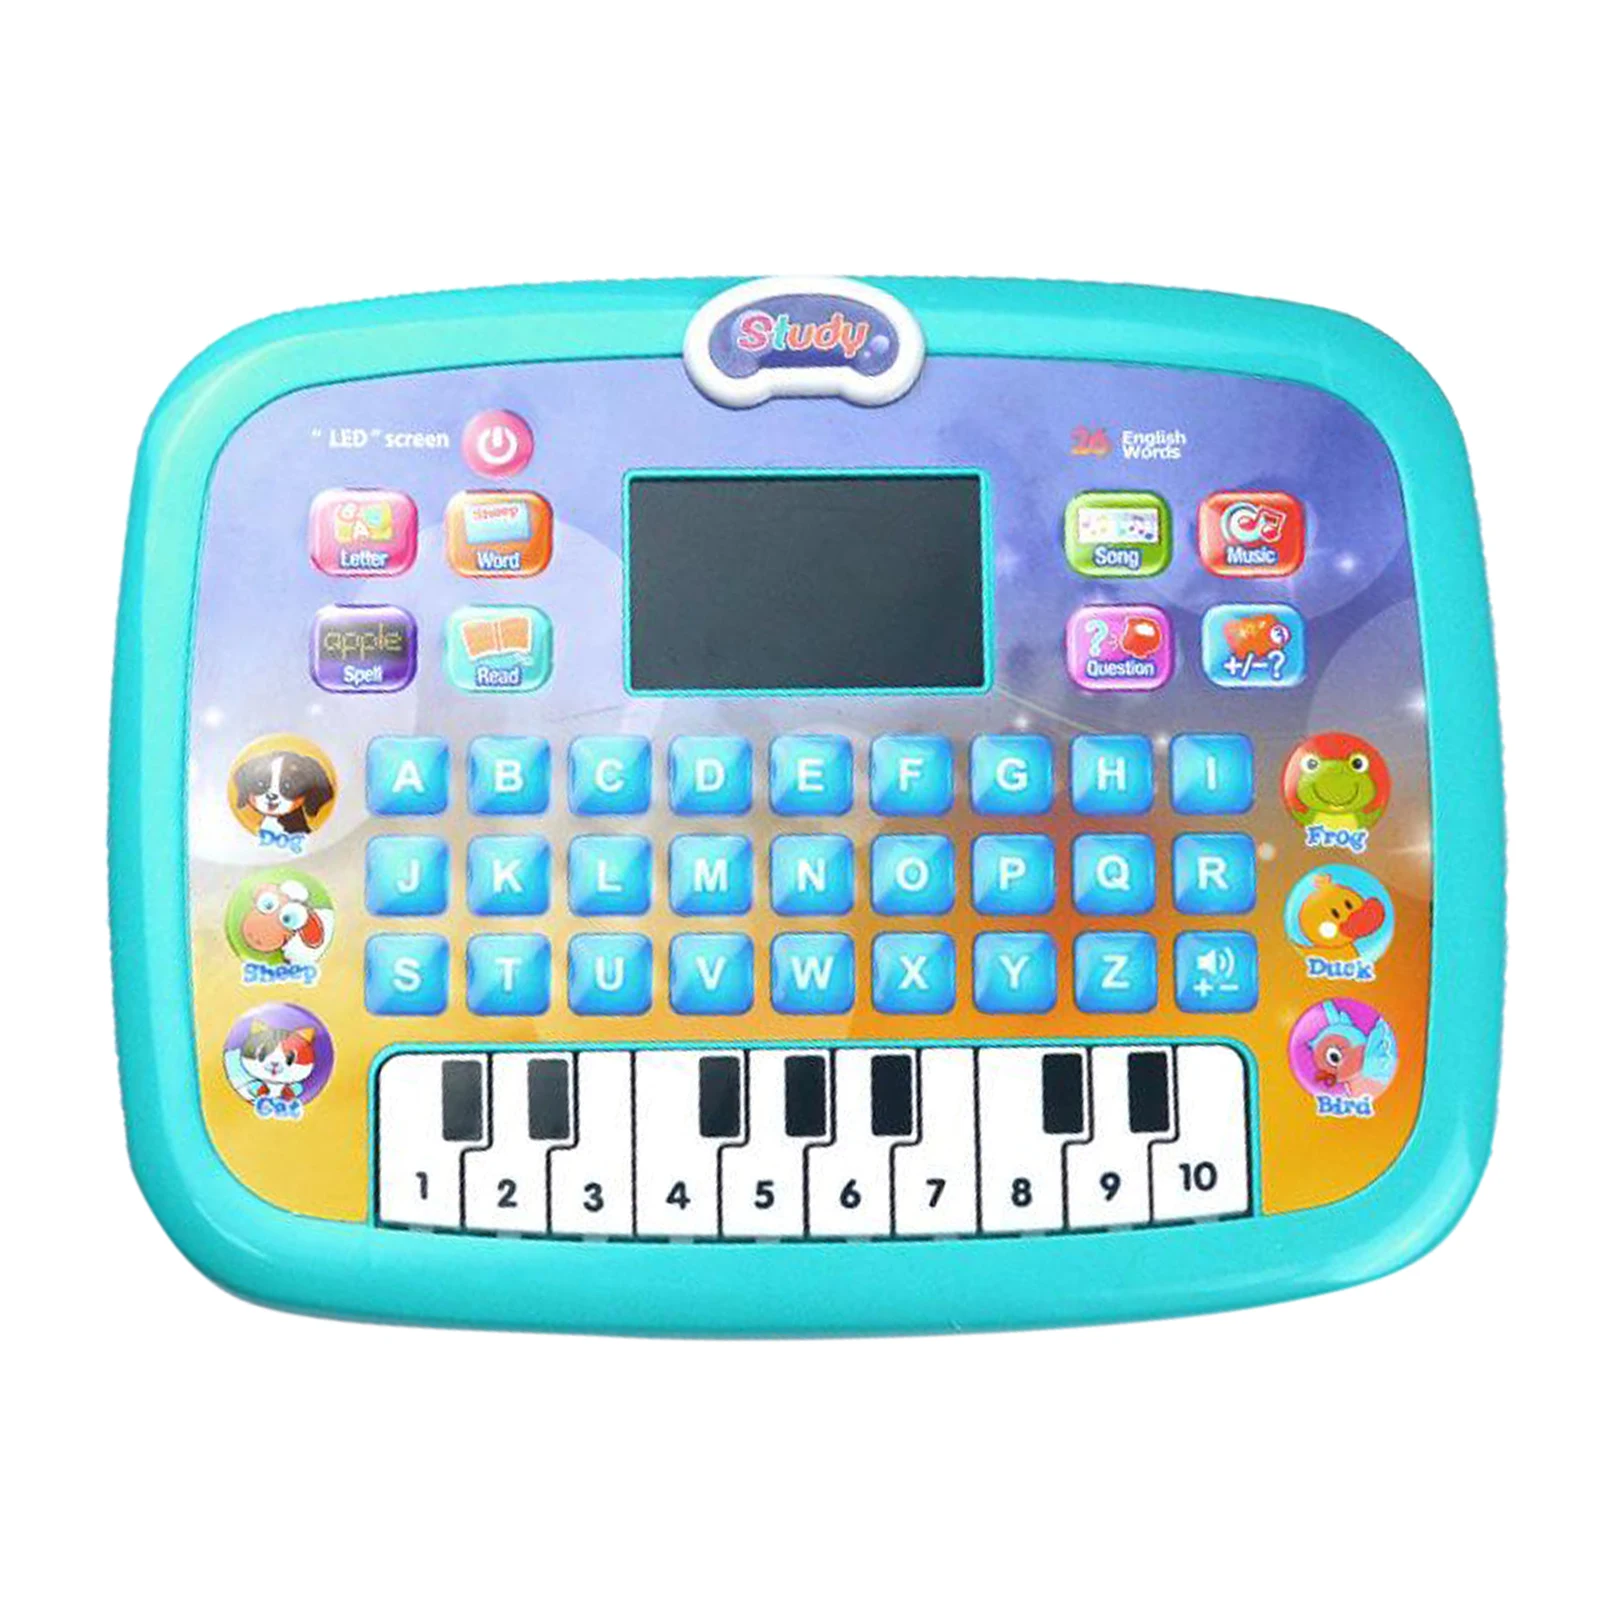 Educational Computer Toys LED Screen Teaching Learning Tablet Machine Gifts